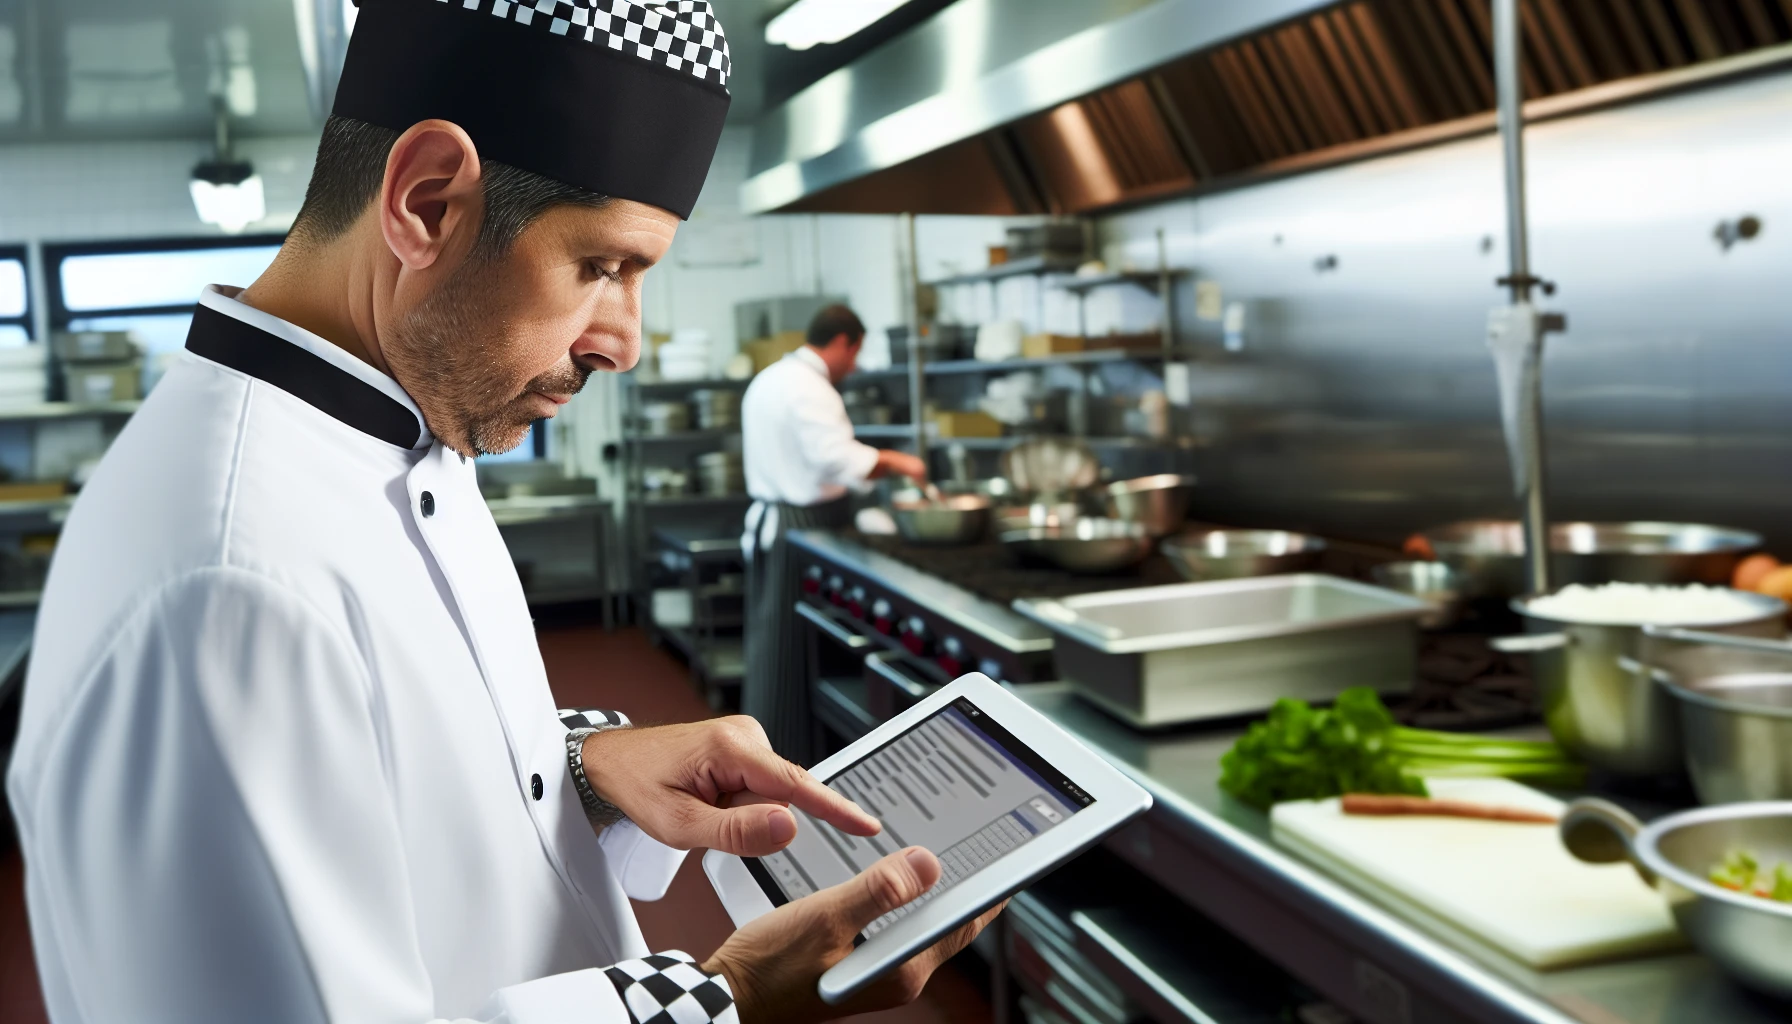 Professional chef using recipe management software on a tablet